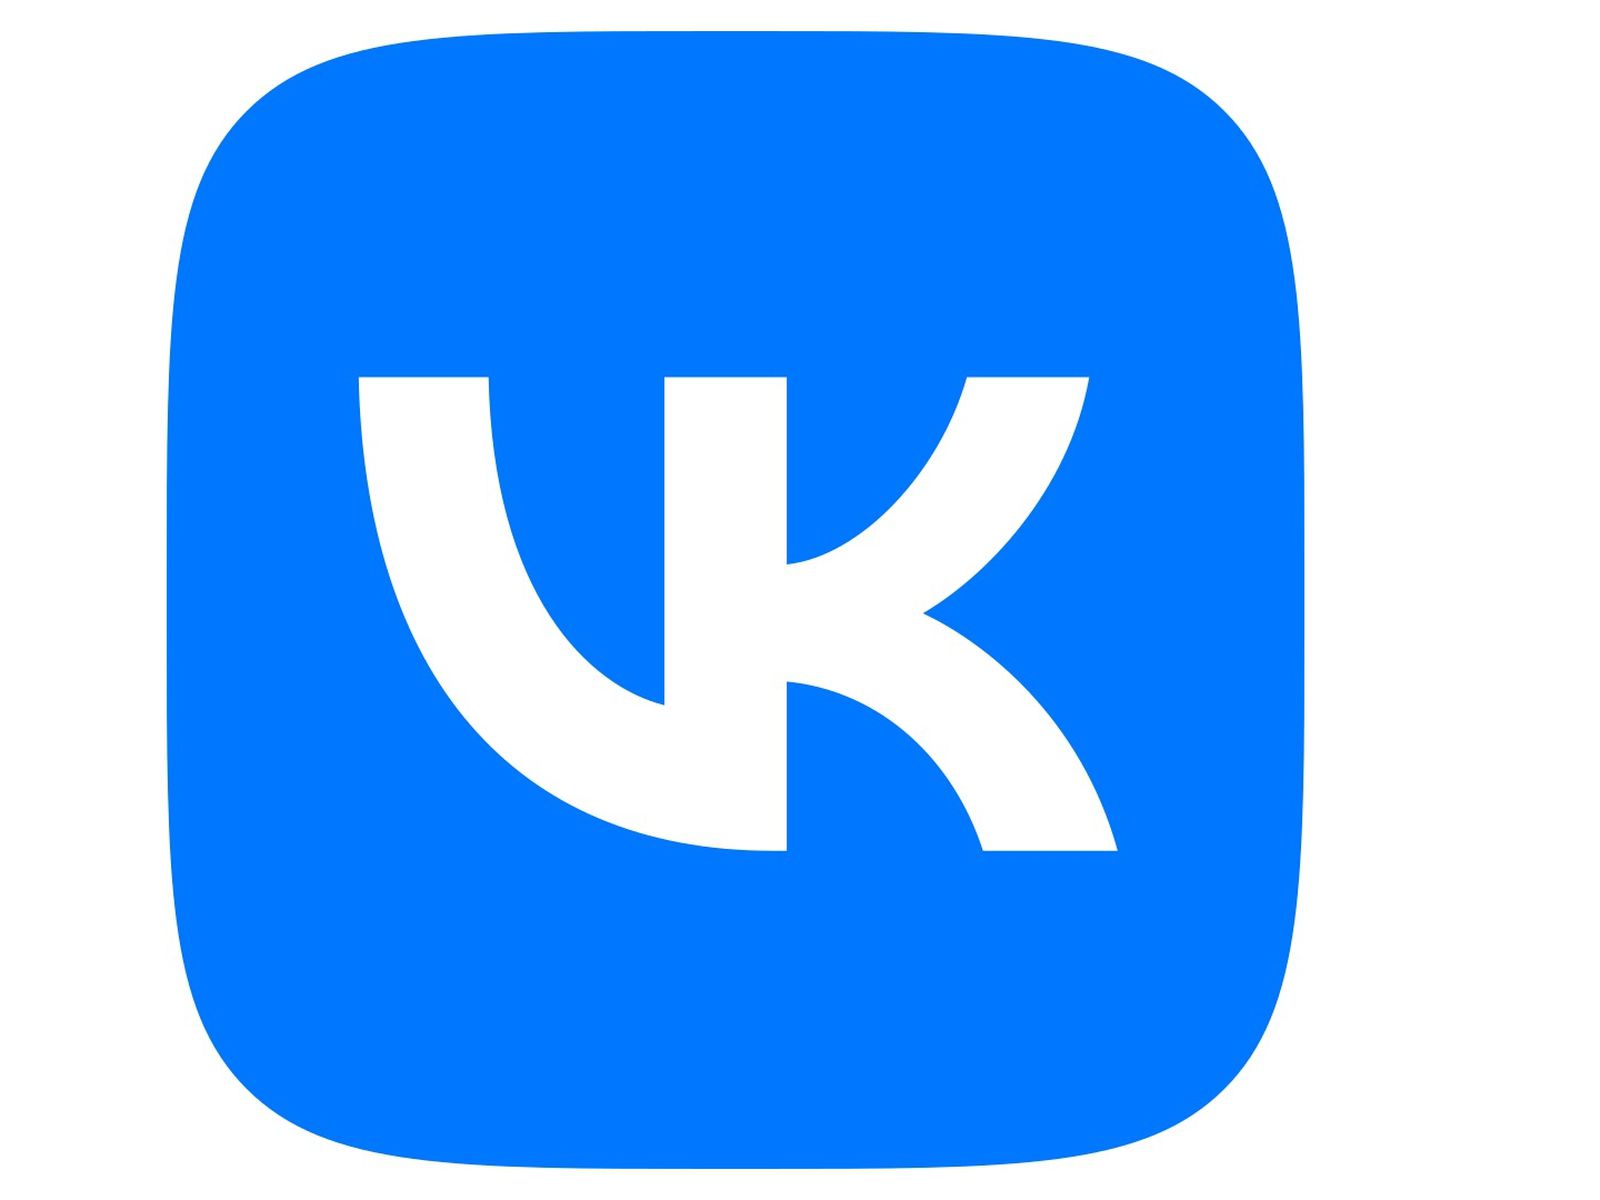 How to DELETE VK ACCOUNT on MOBILE and PC - REMOVE PROFILE 